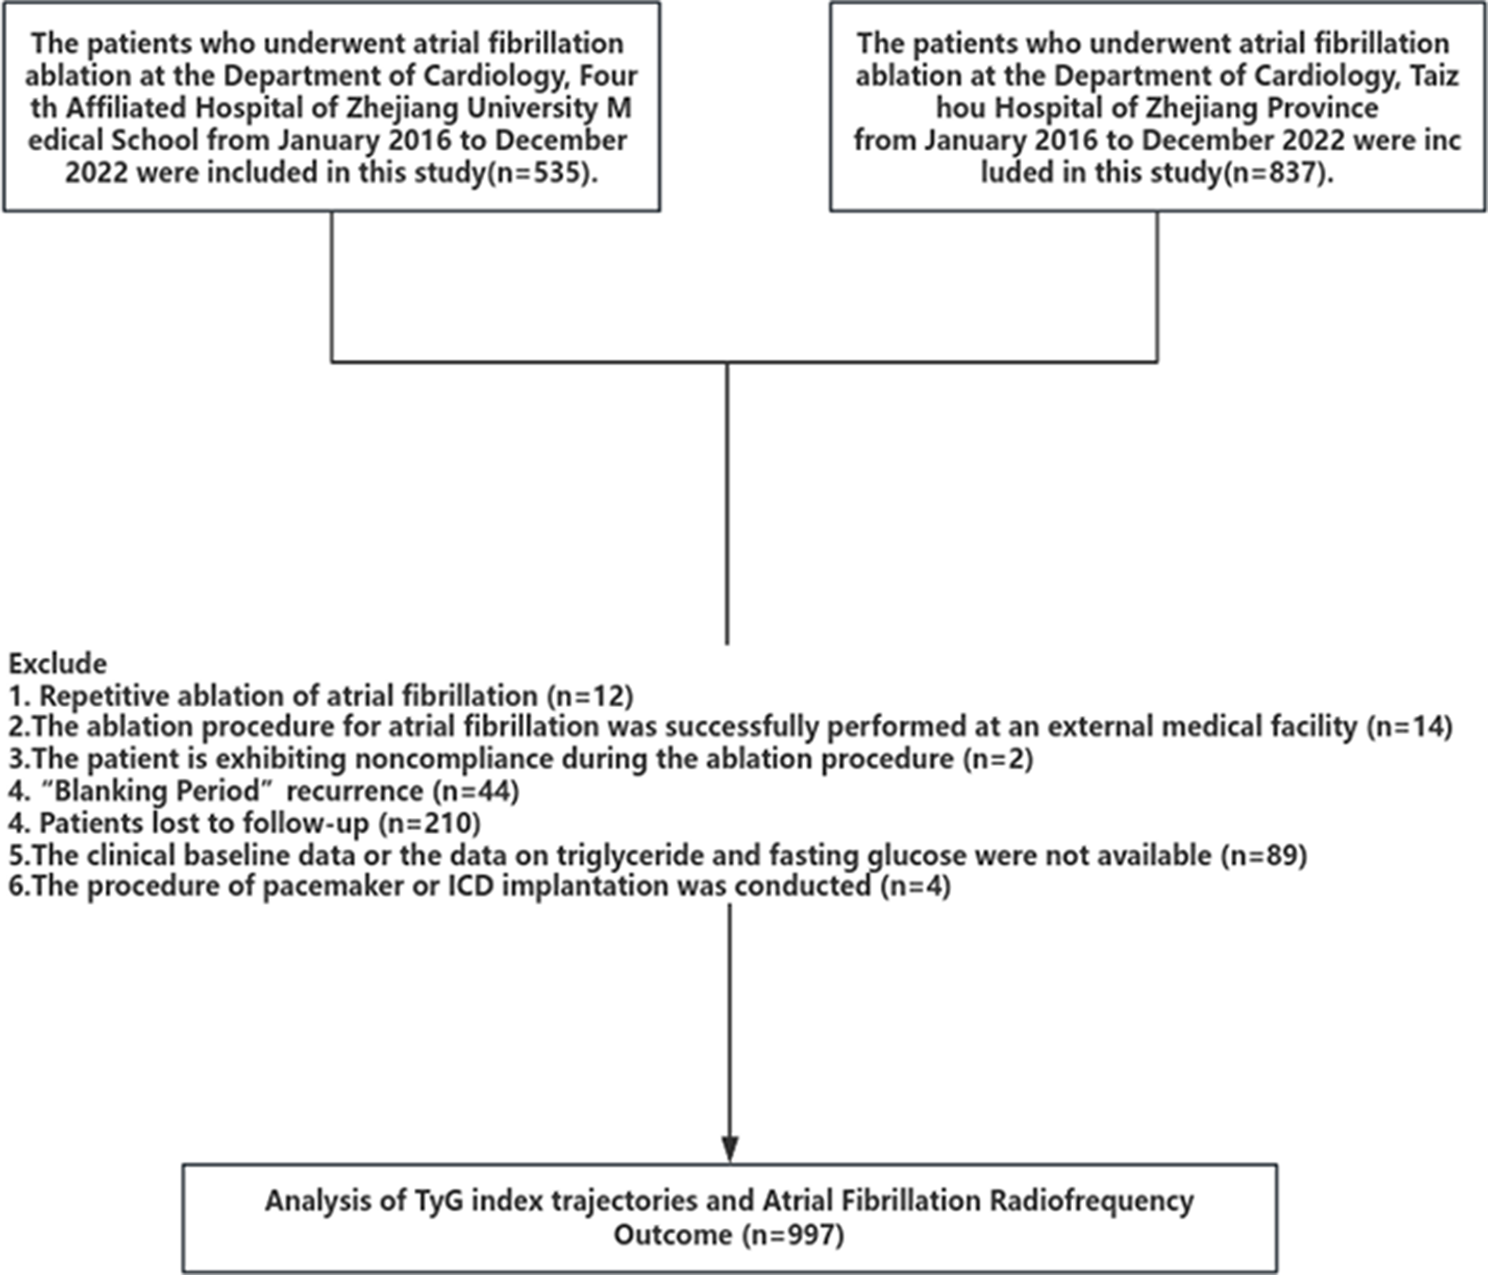 Association between triglyceride–glucose index trajectories and radiofrequency ablation outcomes in patients with stage 3D atrial fibrillation